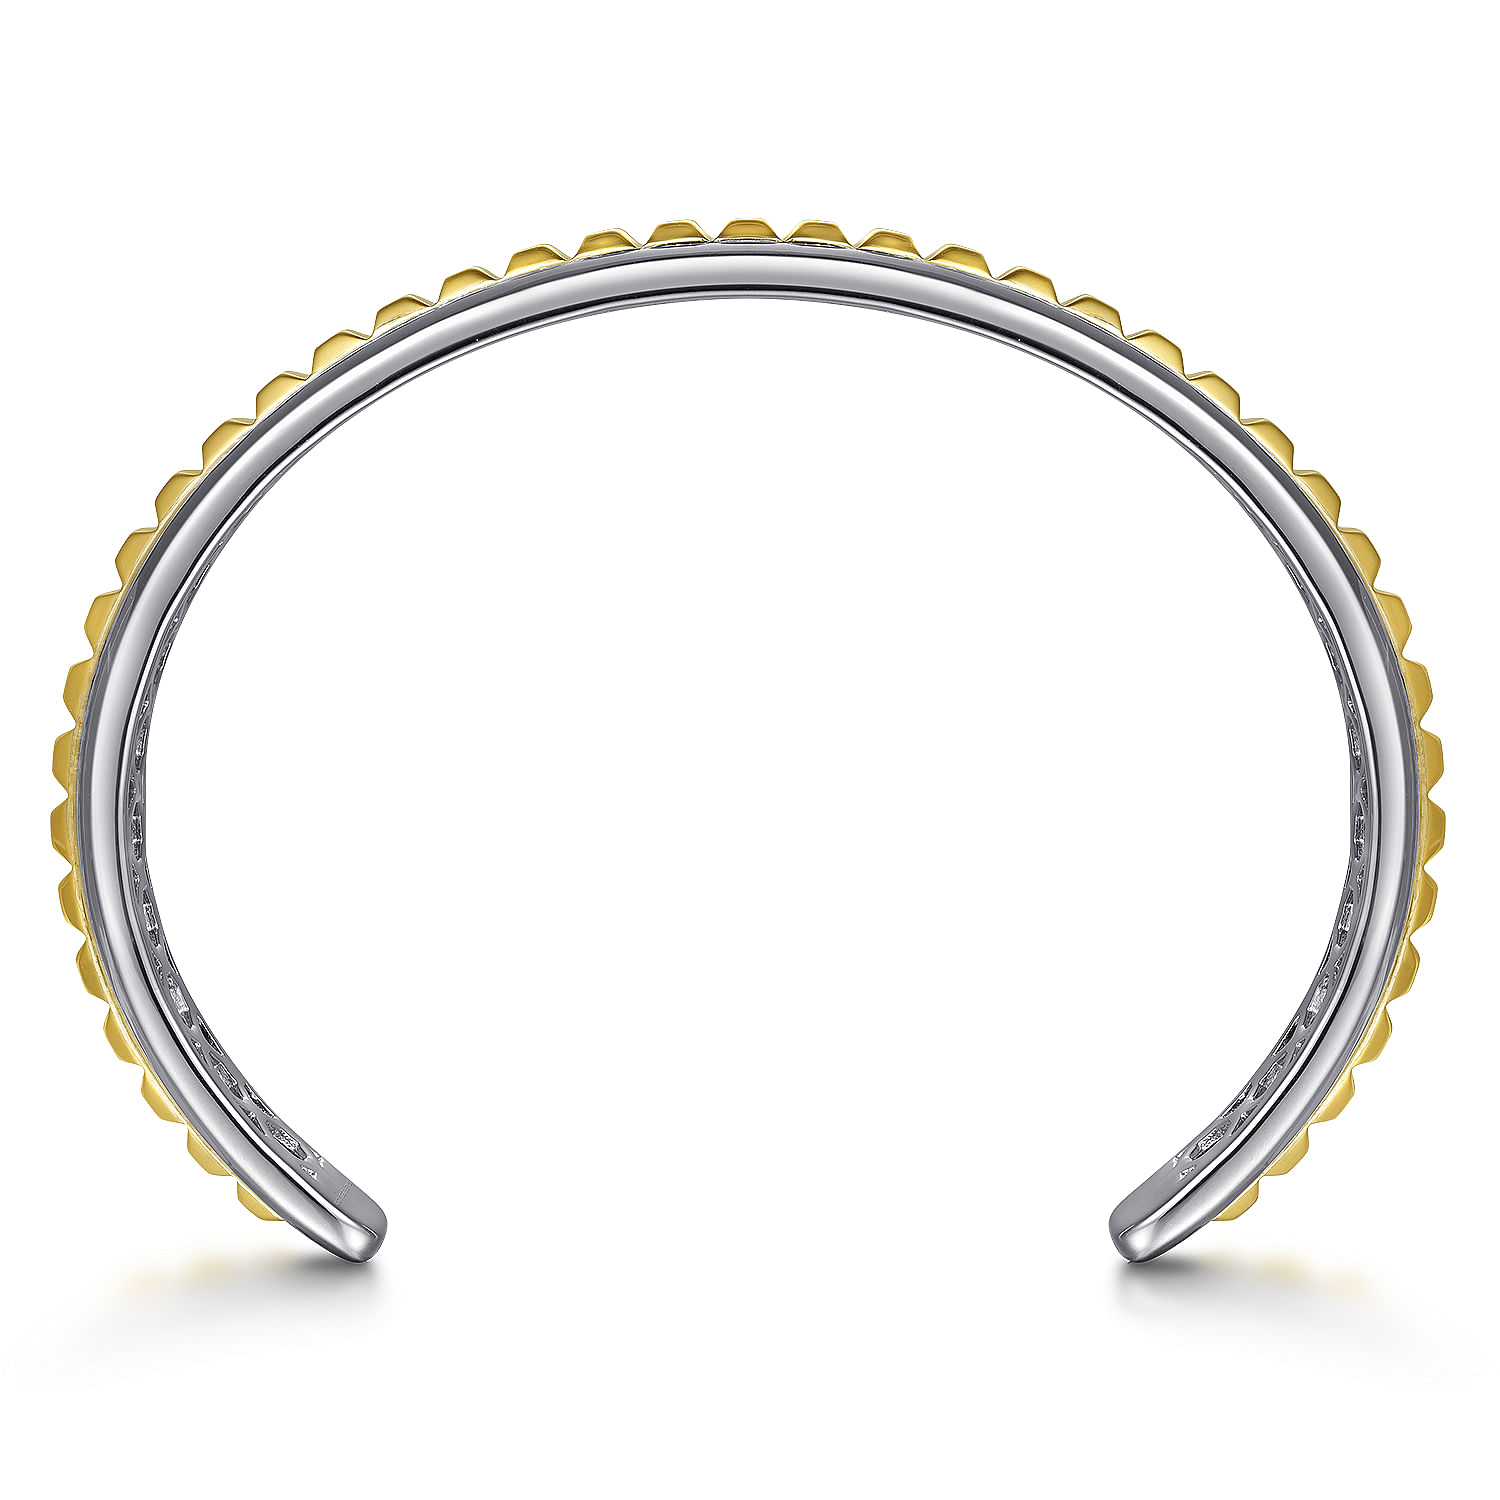 Sterling Silver Open Cuff Bracelet with 14K Yellow Gold Grommets